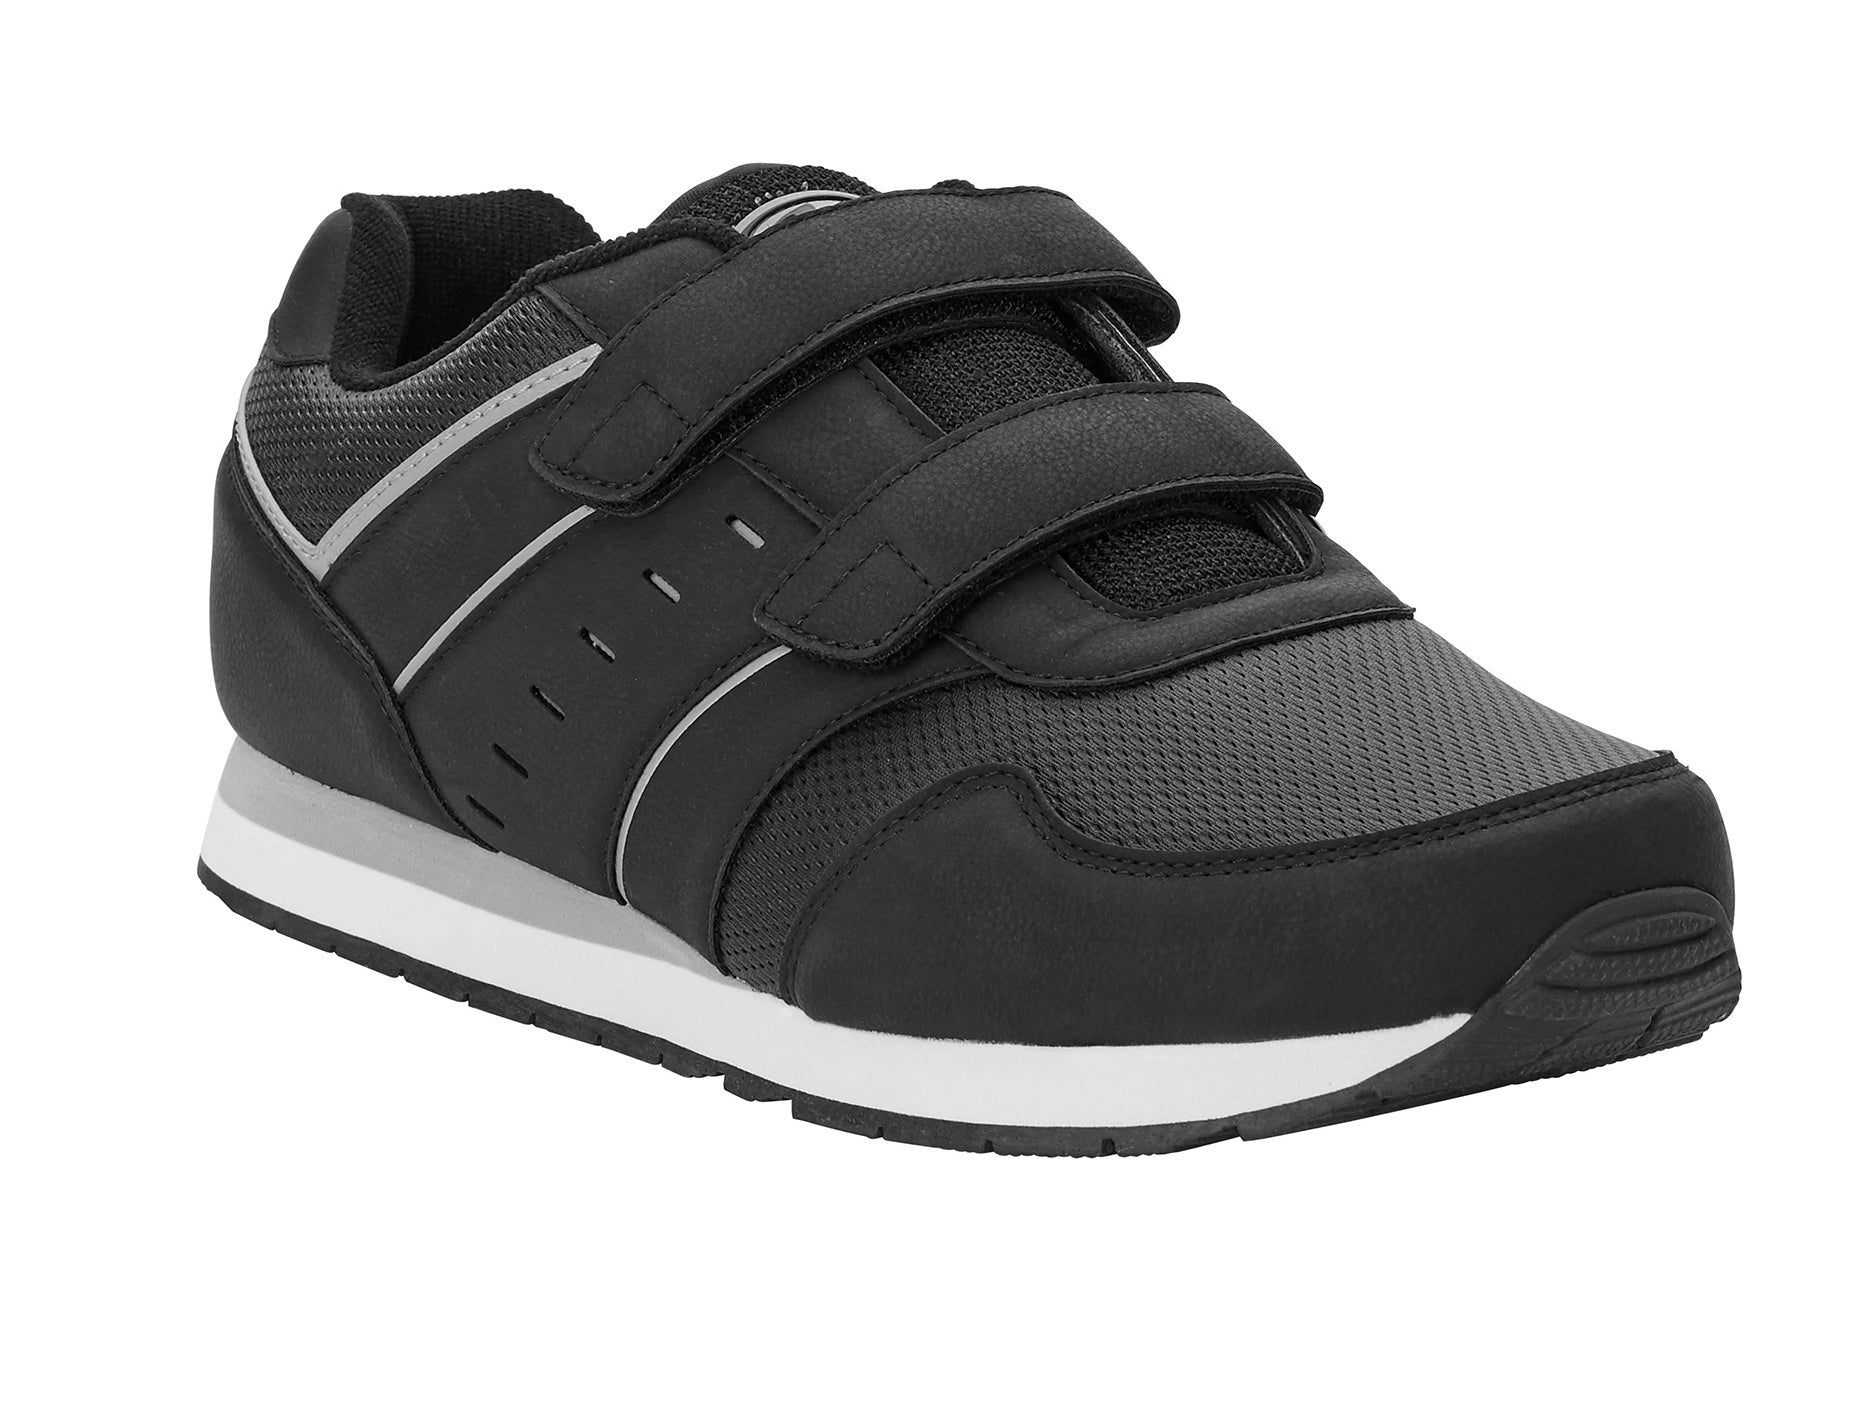 An image of a black athletic shoes with fast strap closure and a cushioned insole